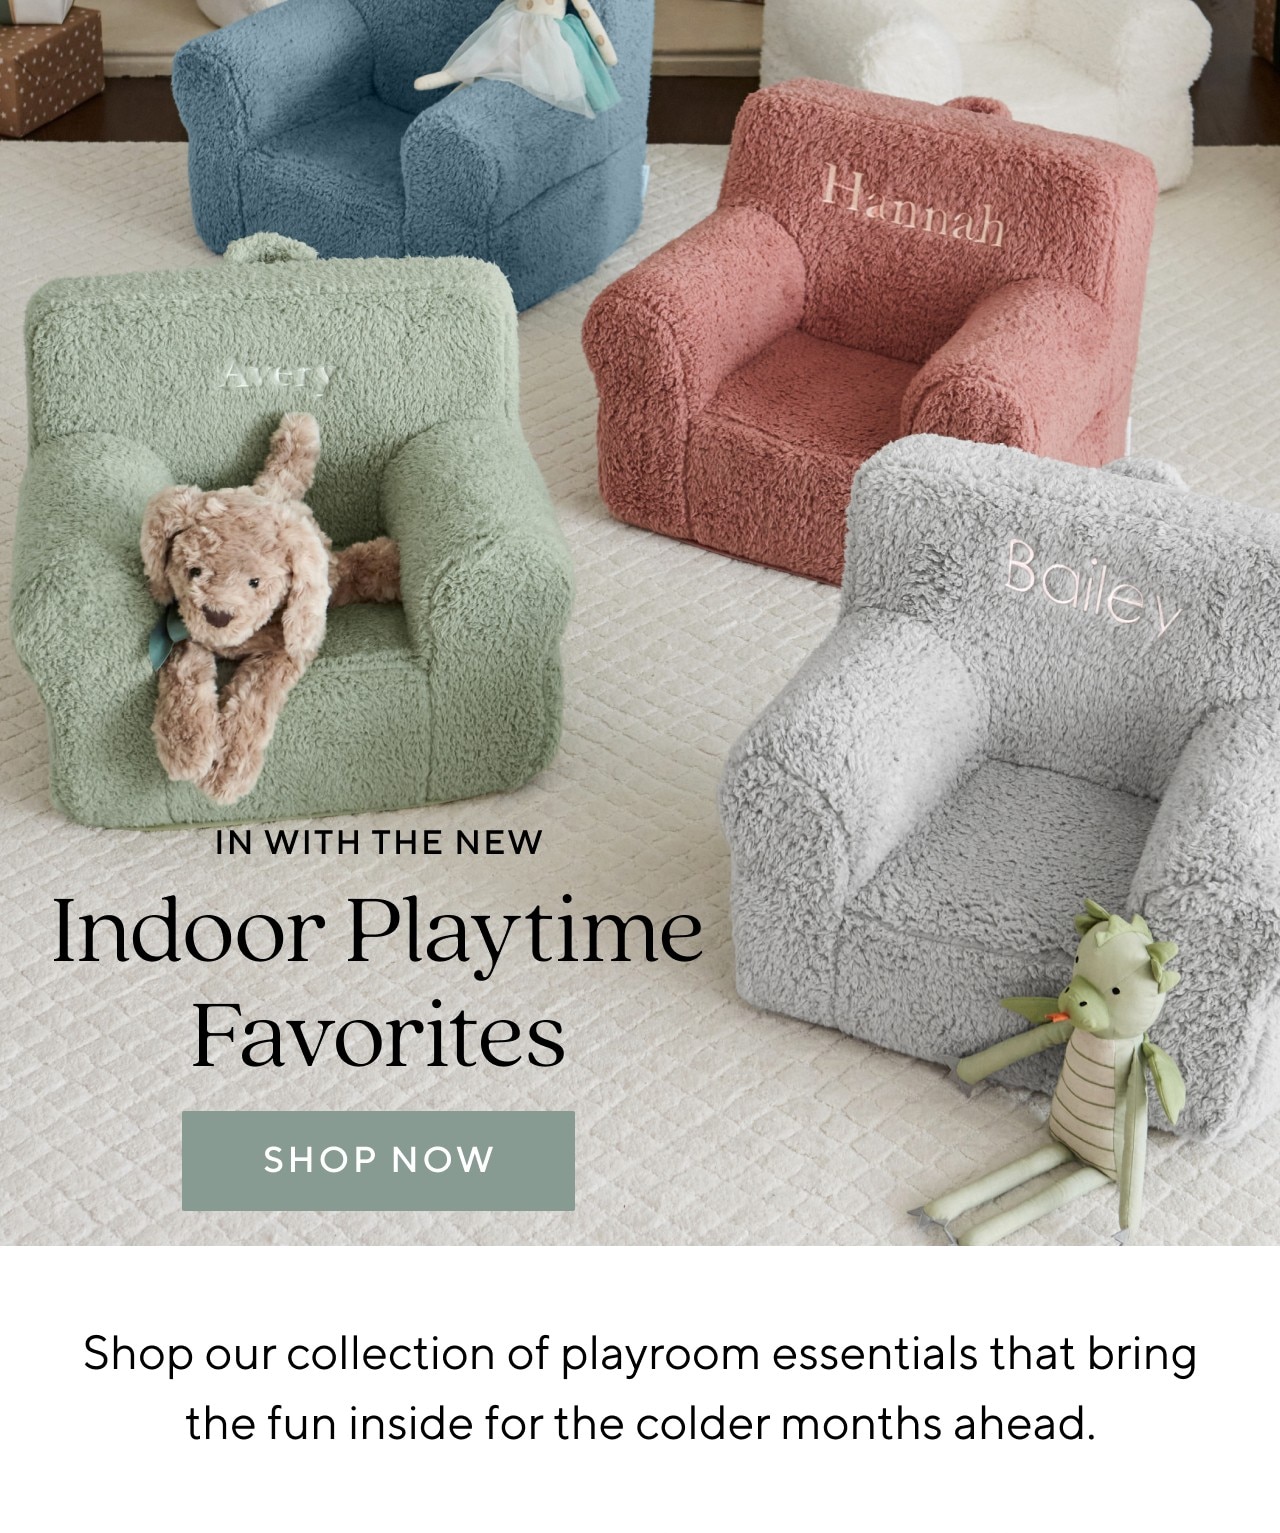 IN WITH THE NEW - INDOOR PLAYTIME FAVORITES